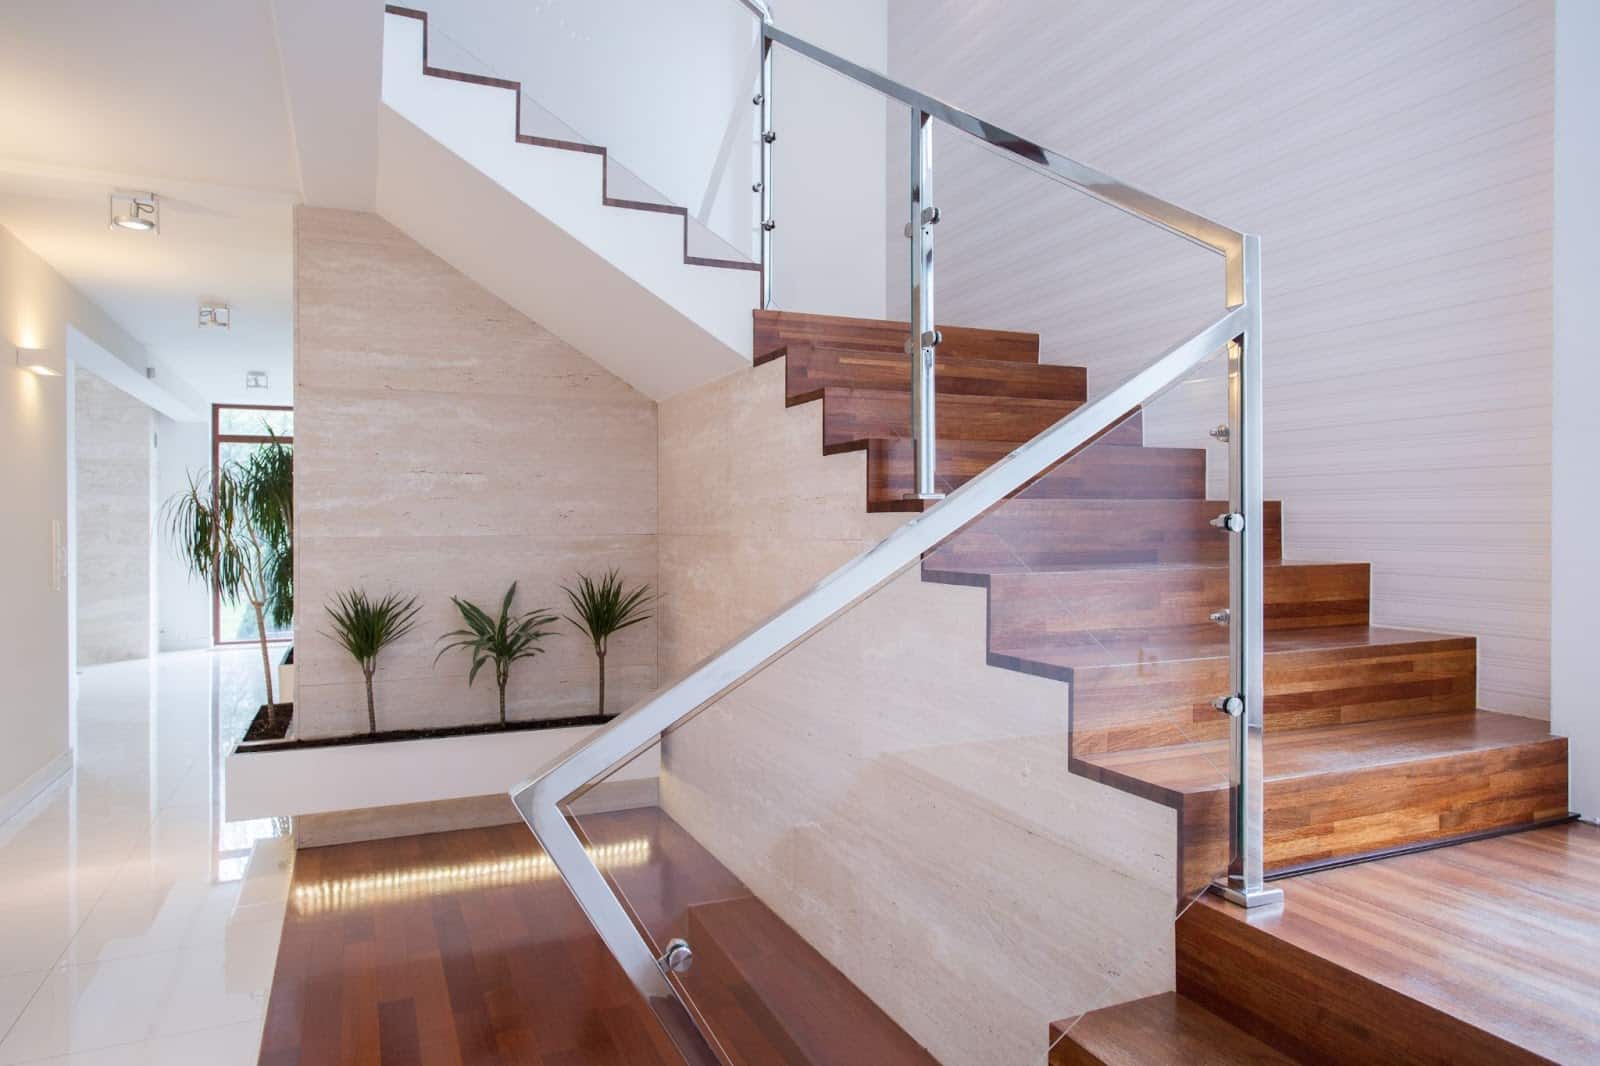 Glass handrail in the stairs